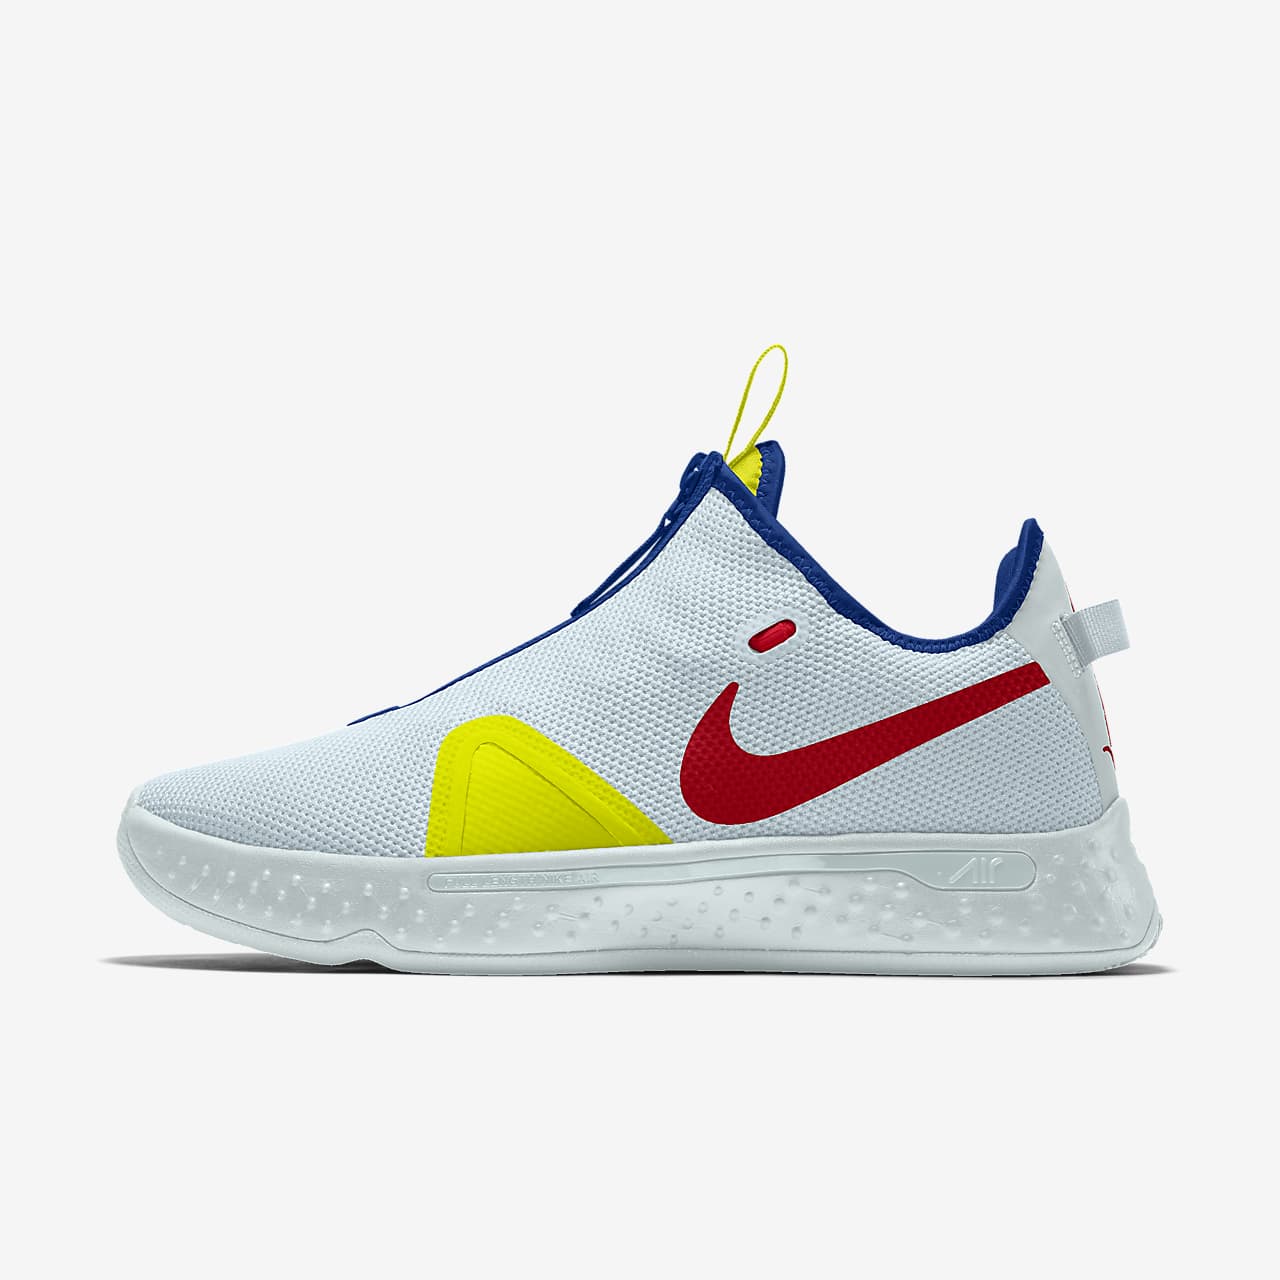 pg 4 nike by you